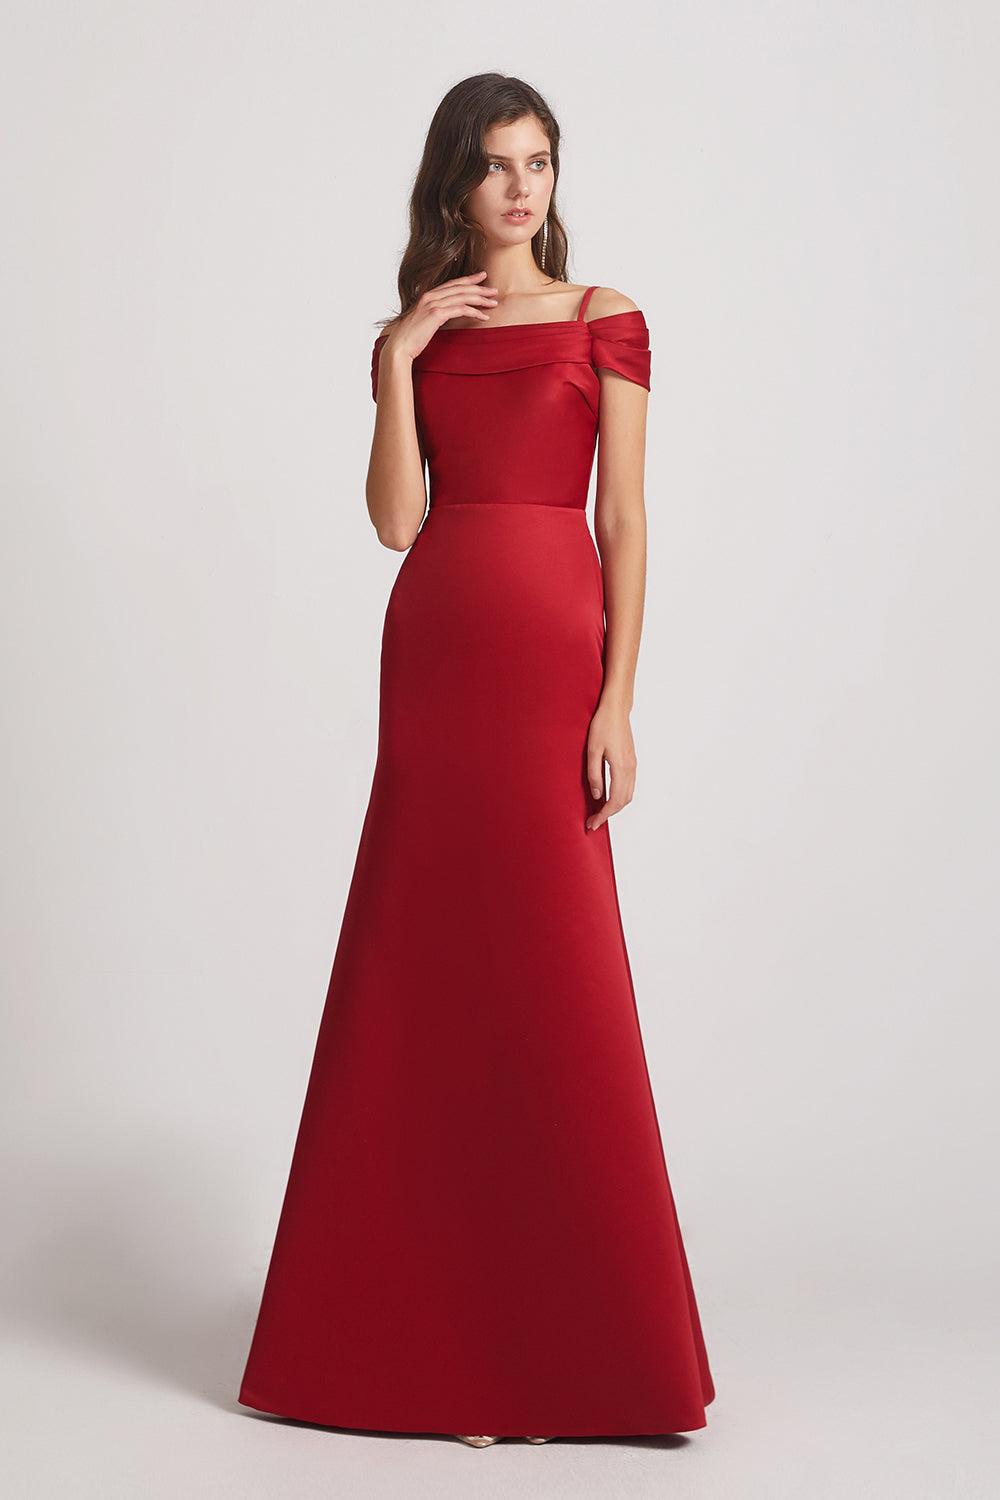 red wedding party dresses